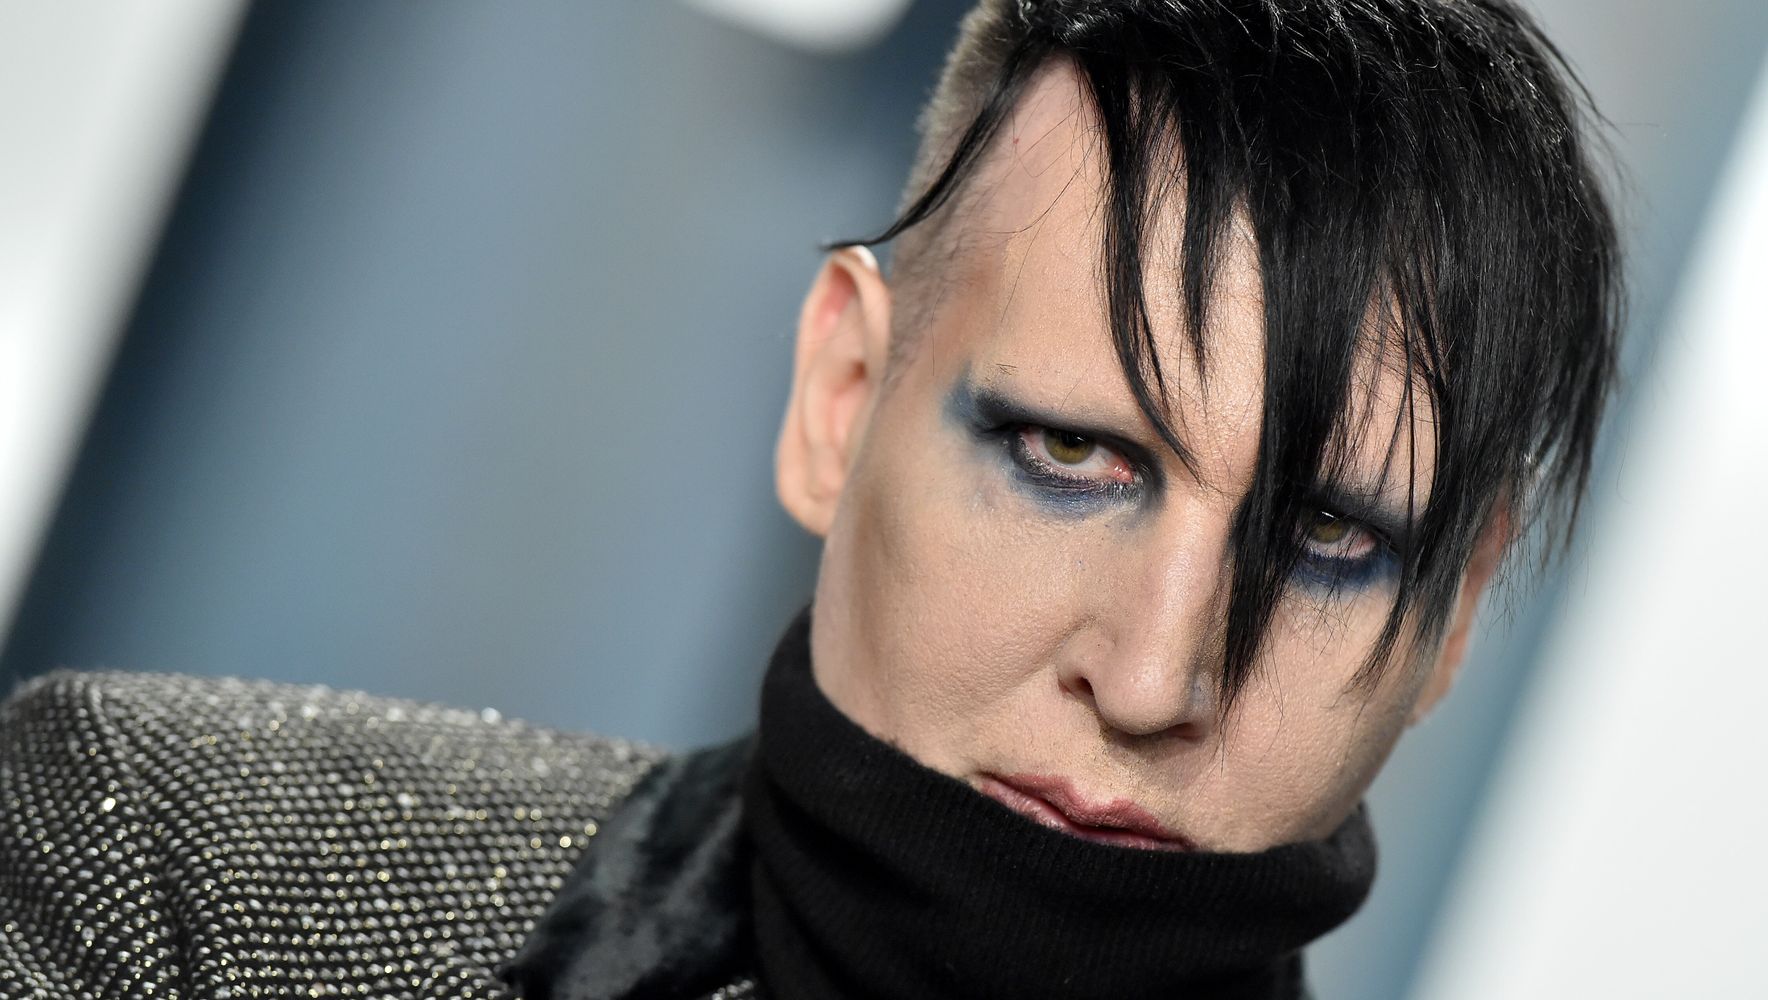 Marilyn Manson's Ex Says He Raped, 'Brainwashed' Her: 'I Survived A Monster'